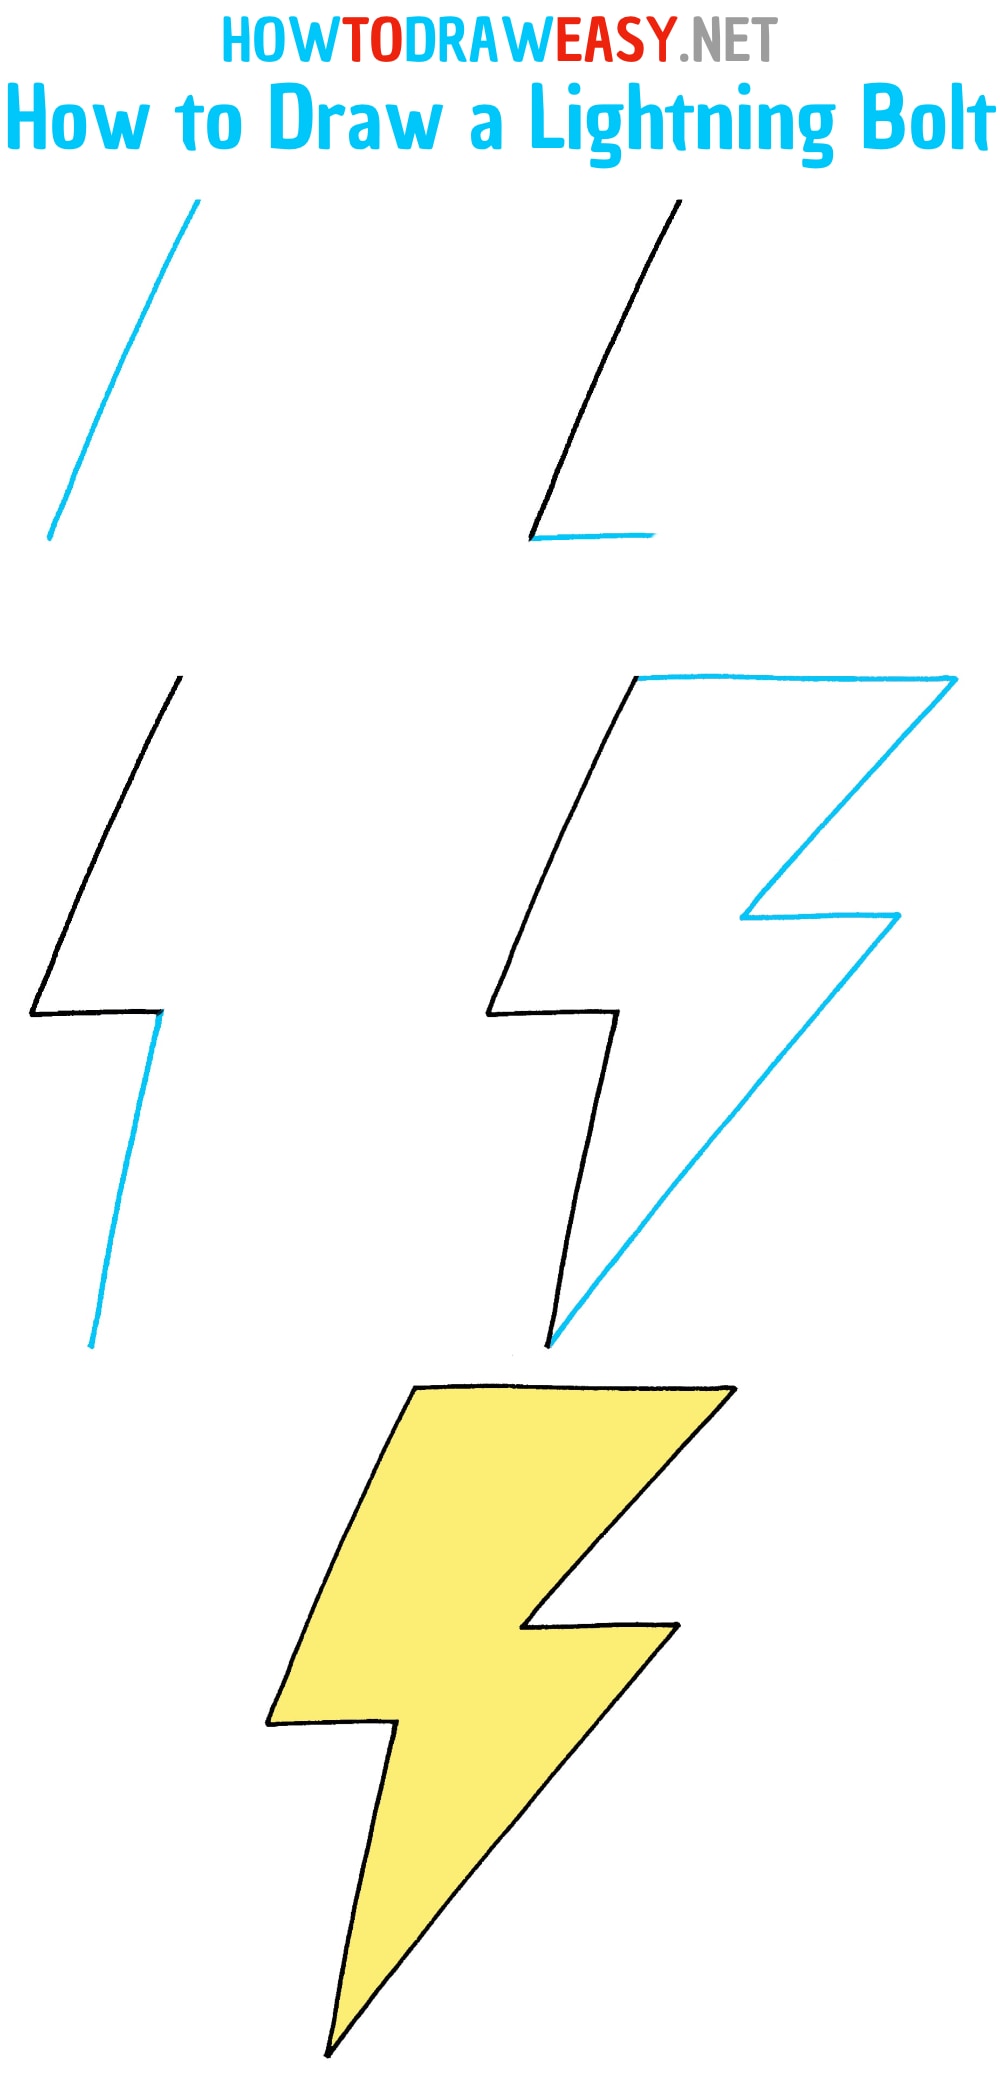 How to Draw a Lightning Bolt Step by Step